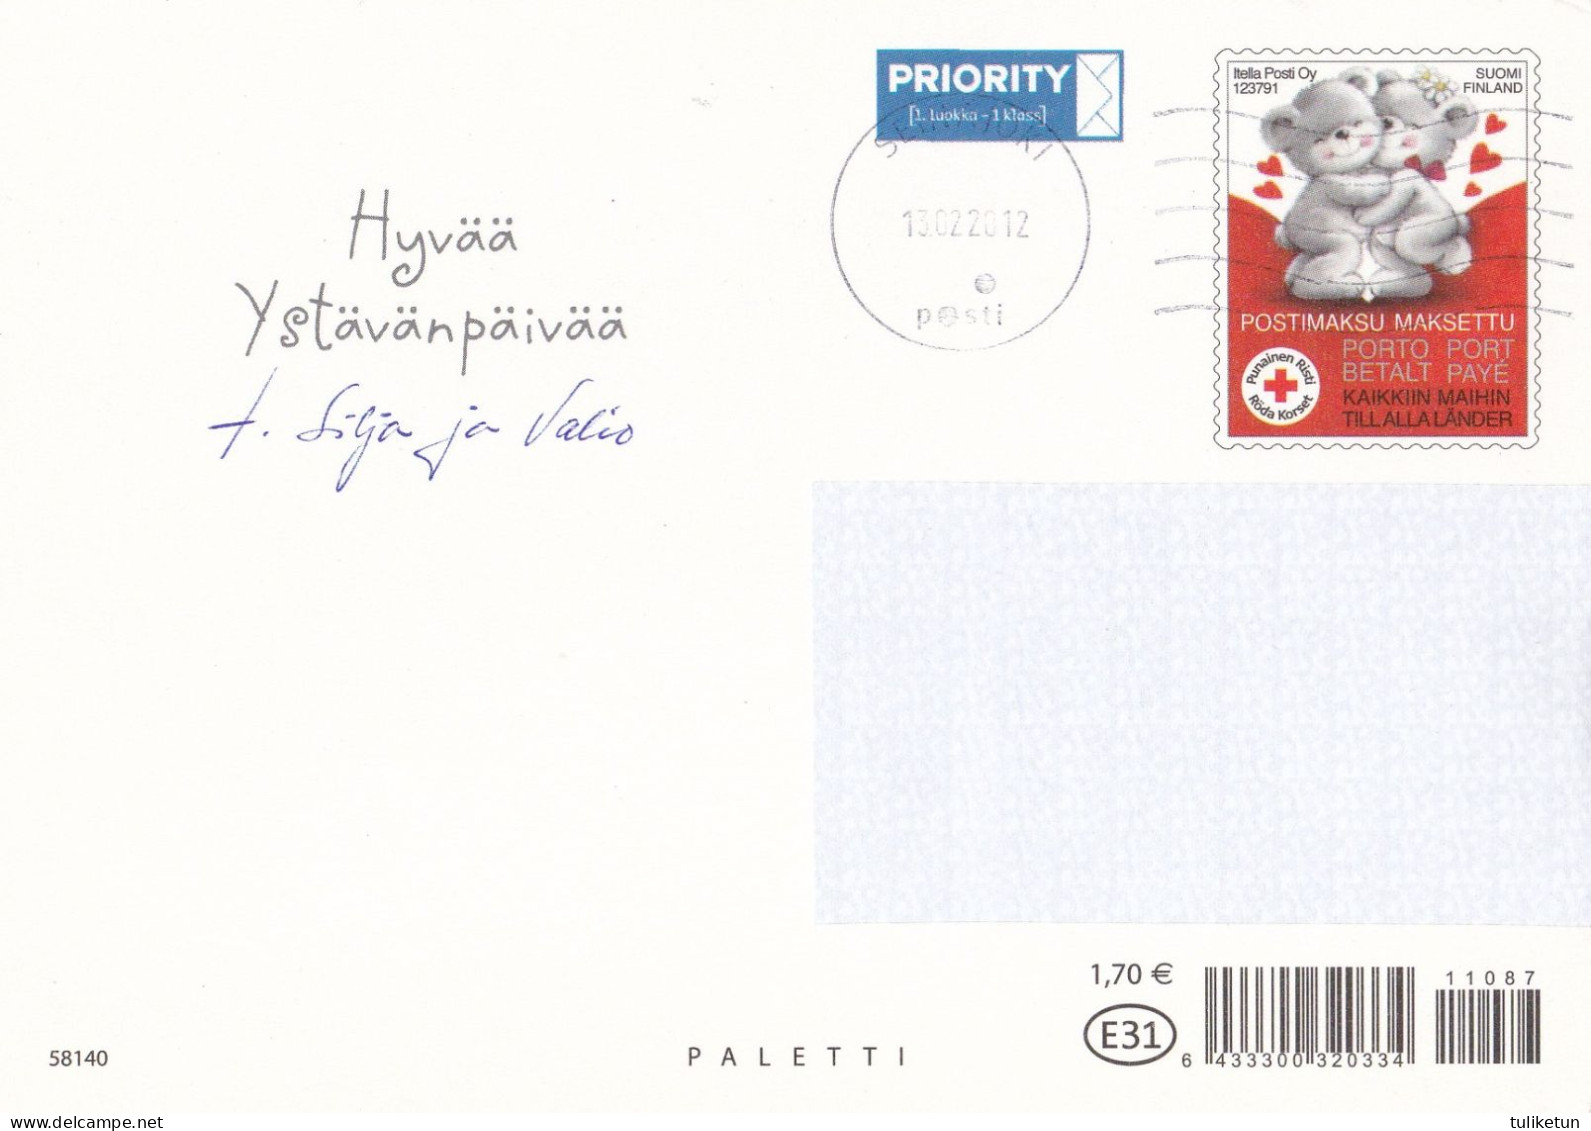 Postal Stationery - Teddy Bears Hugging Together - Red Cross 2012 - Suomi Finland - Postage Paid - Enteros Postales